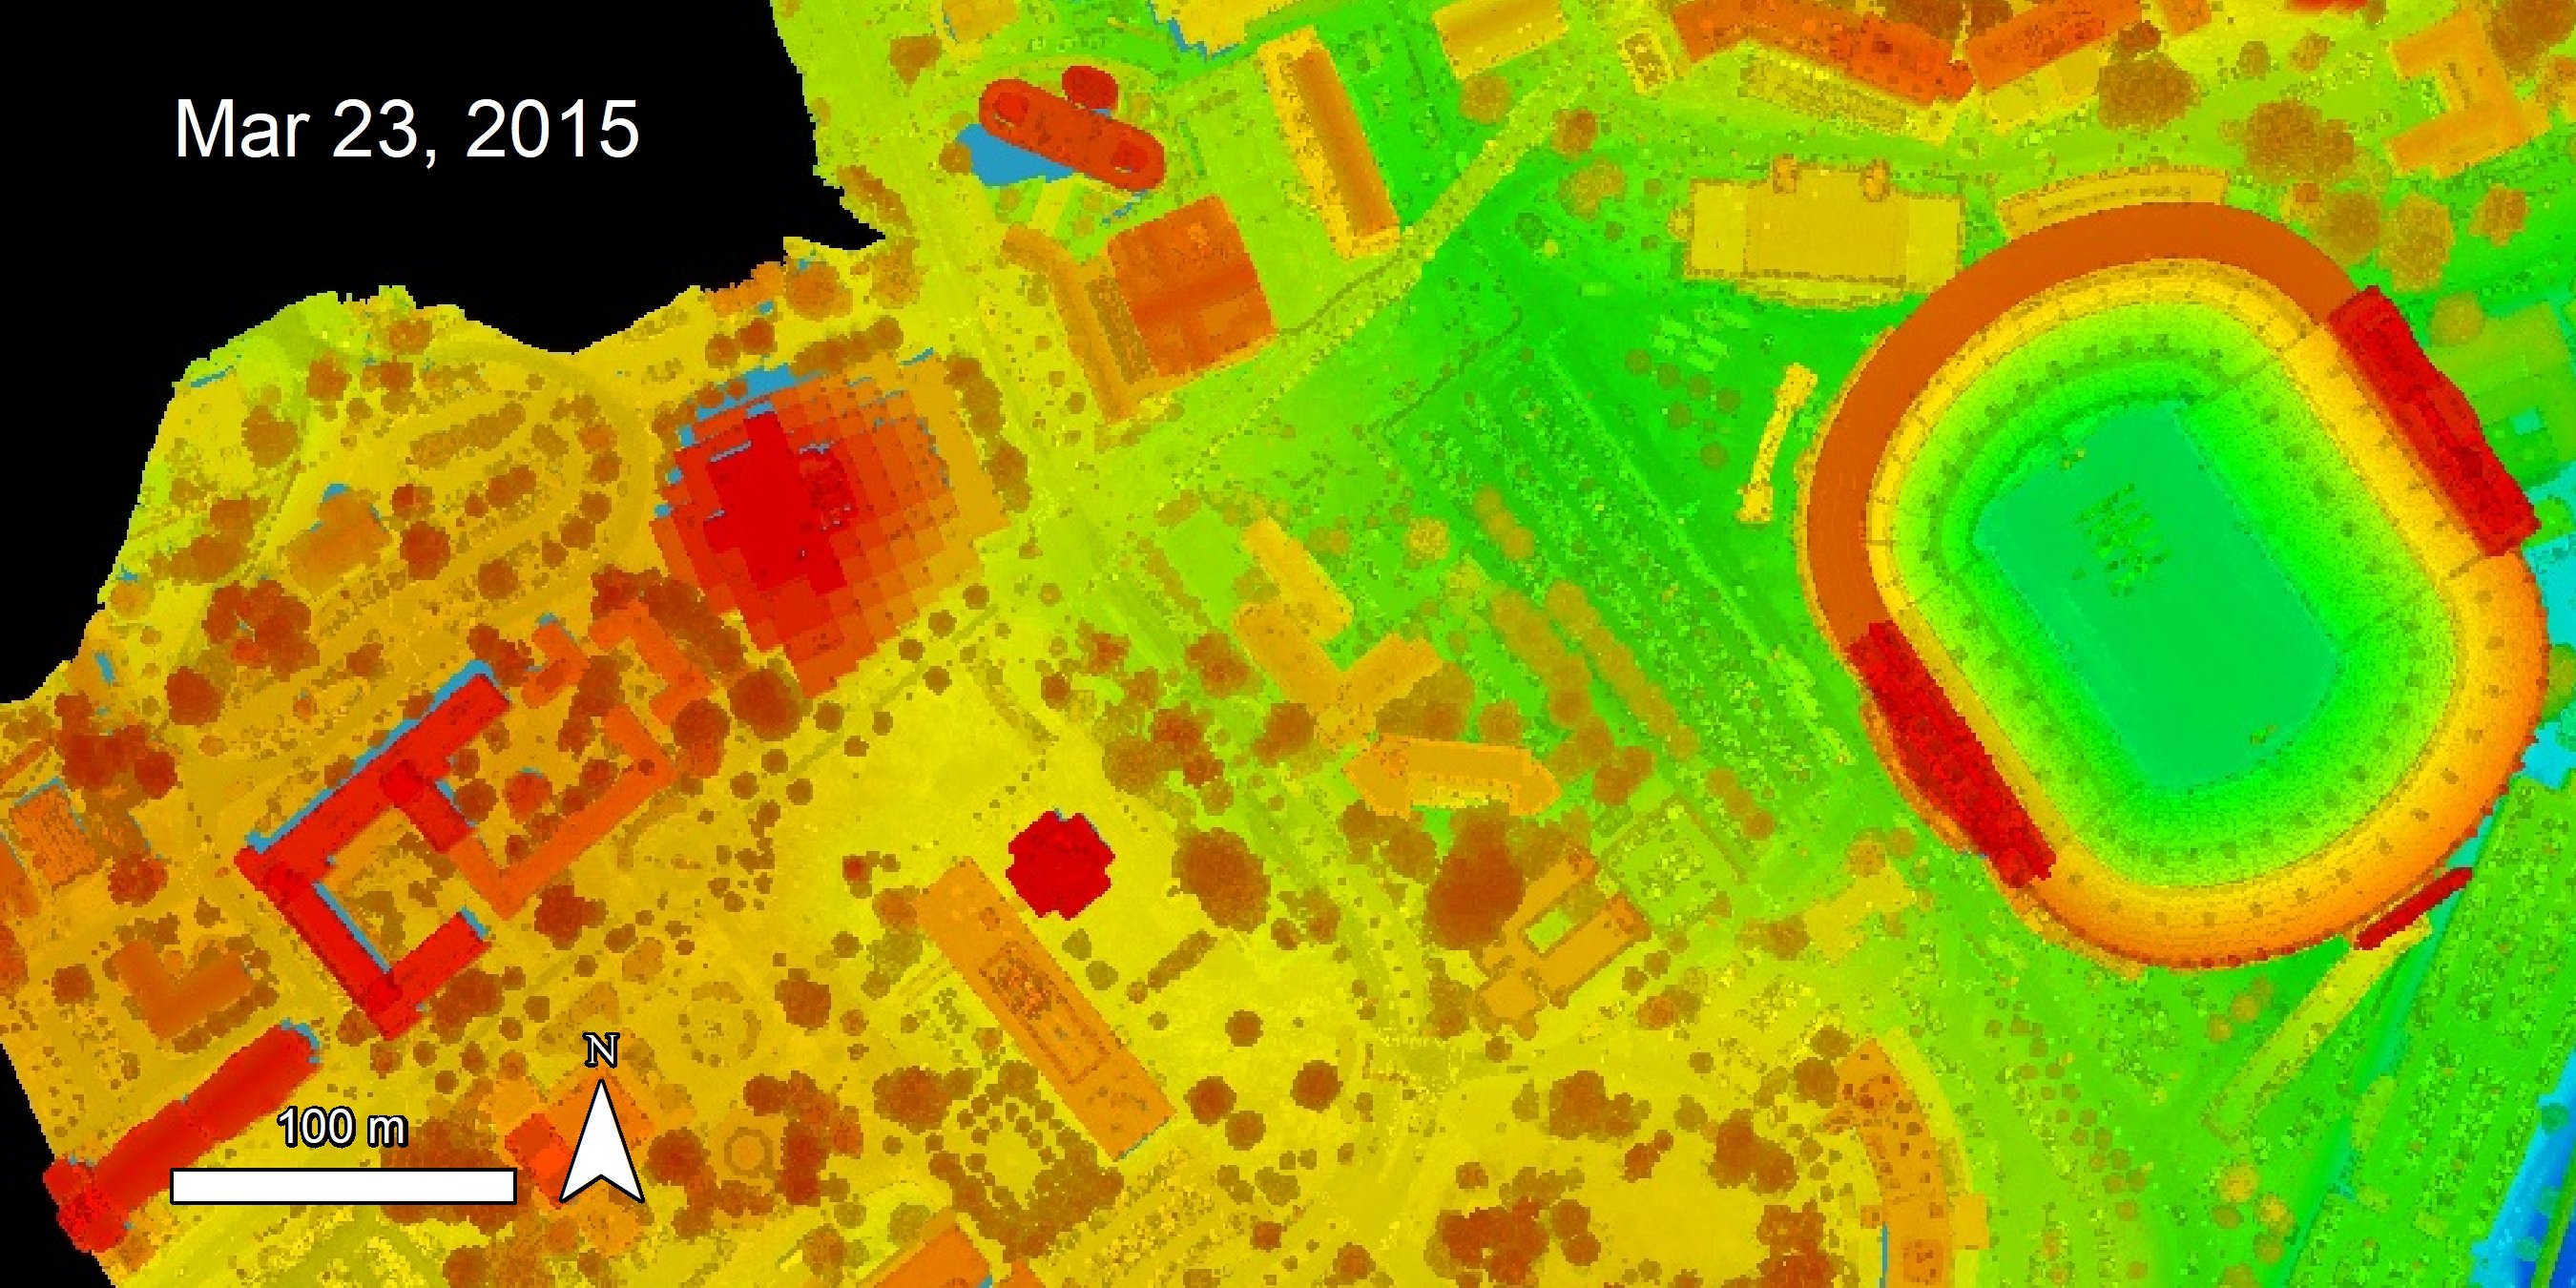 G-LiHT Point Cloud data over the University of Tennessee's campus.